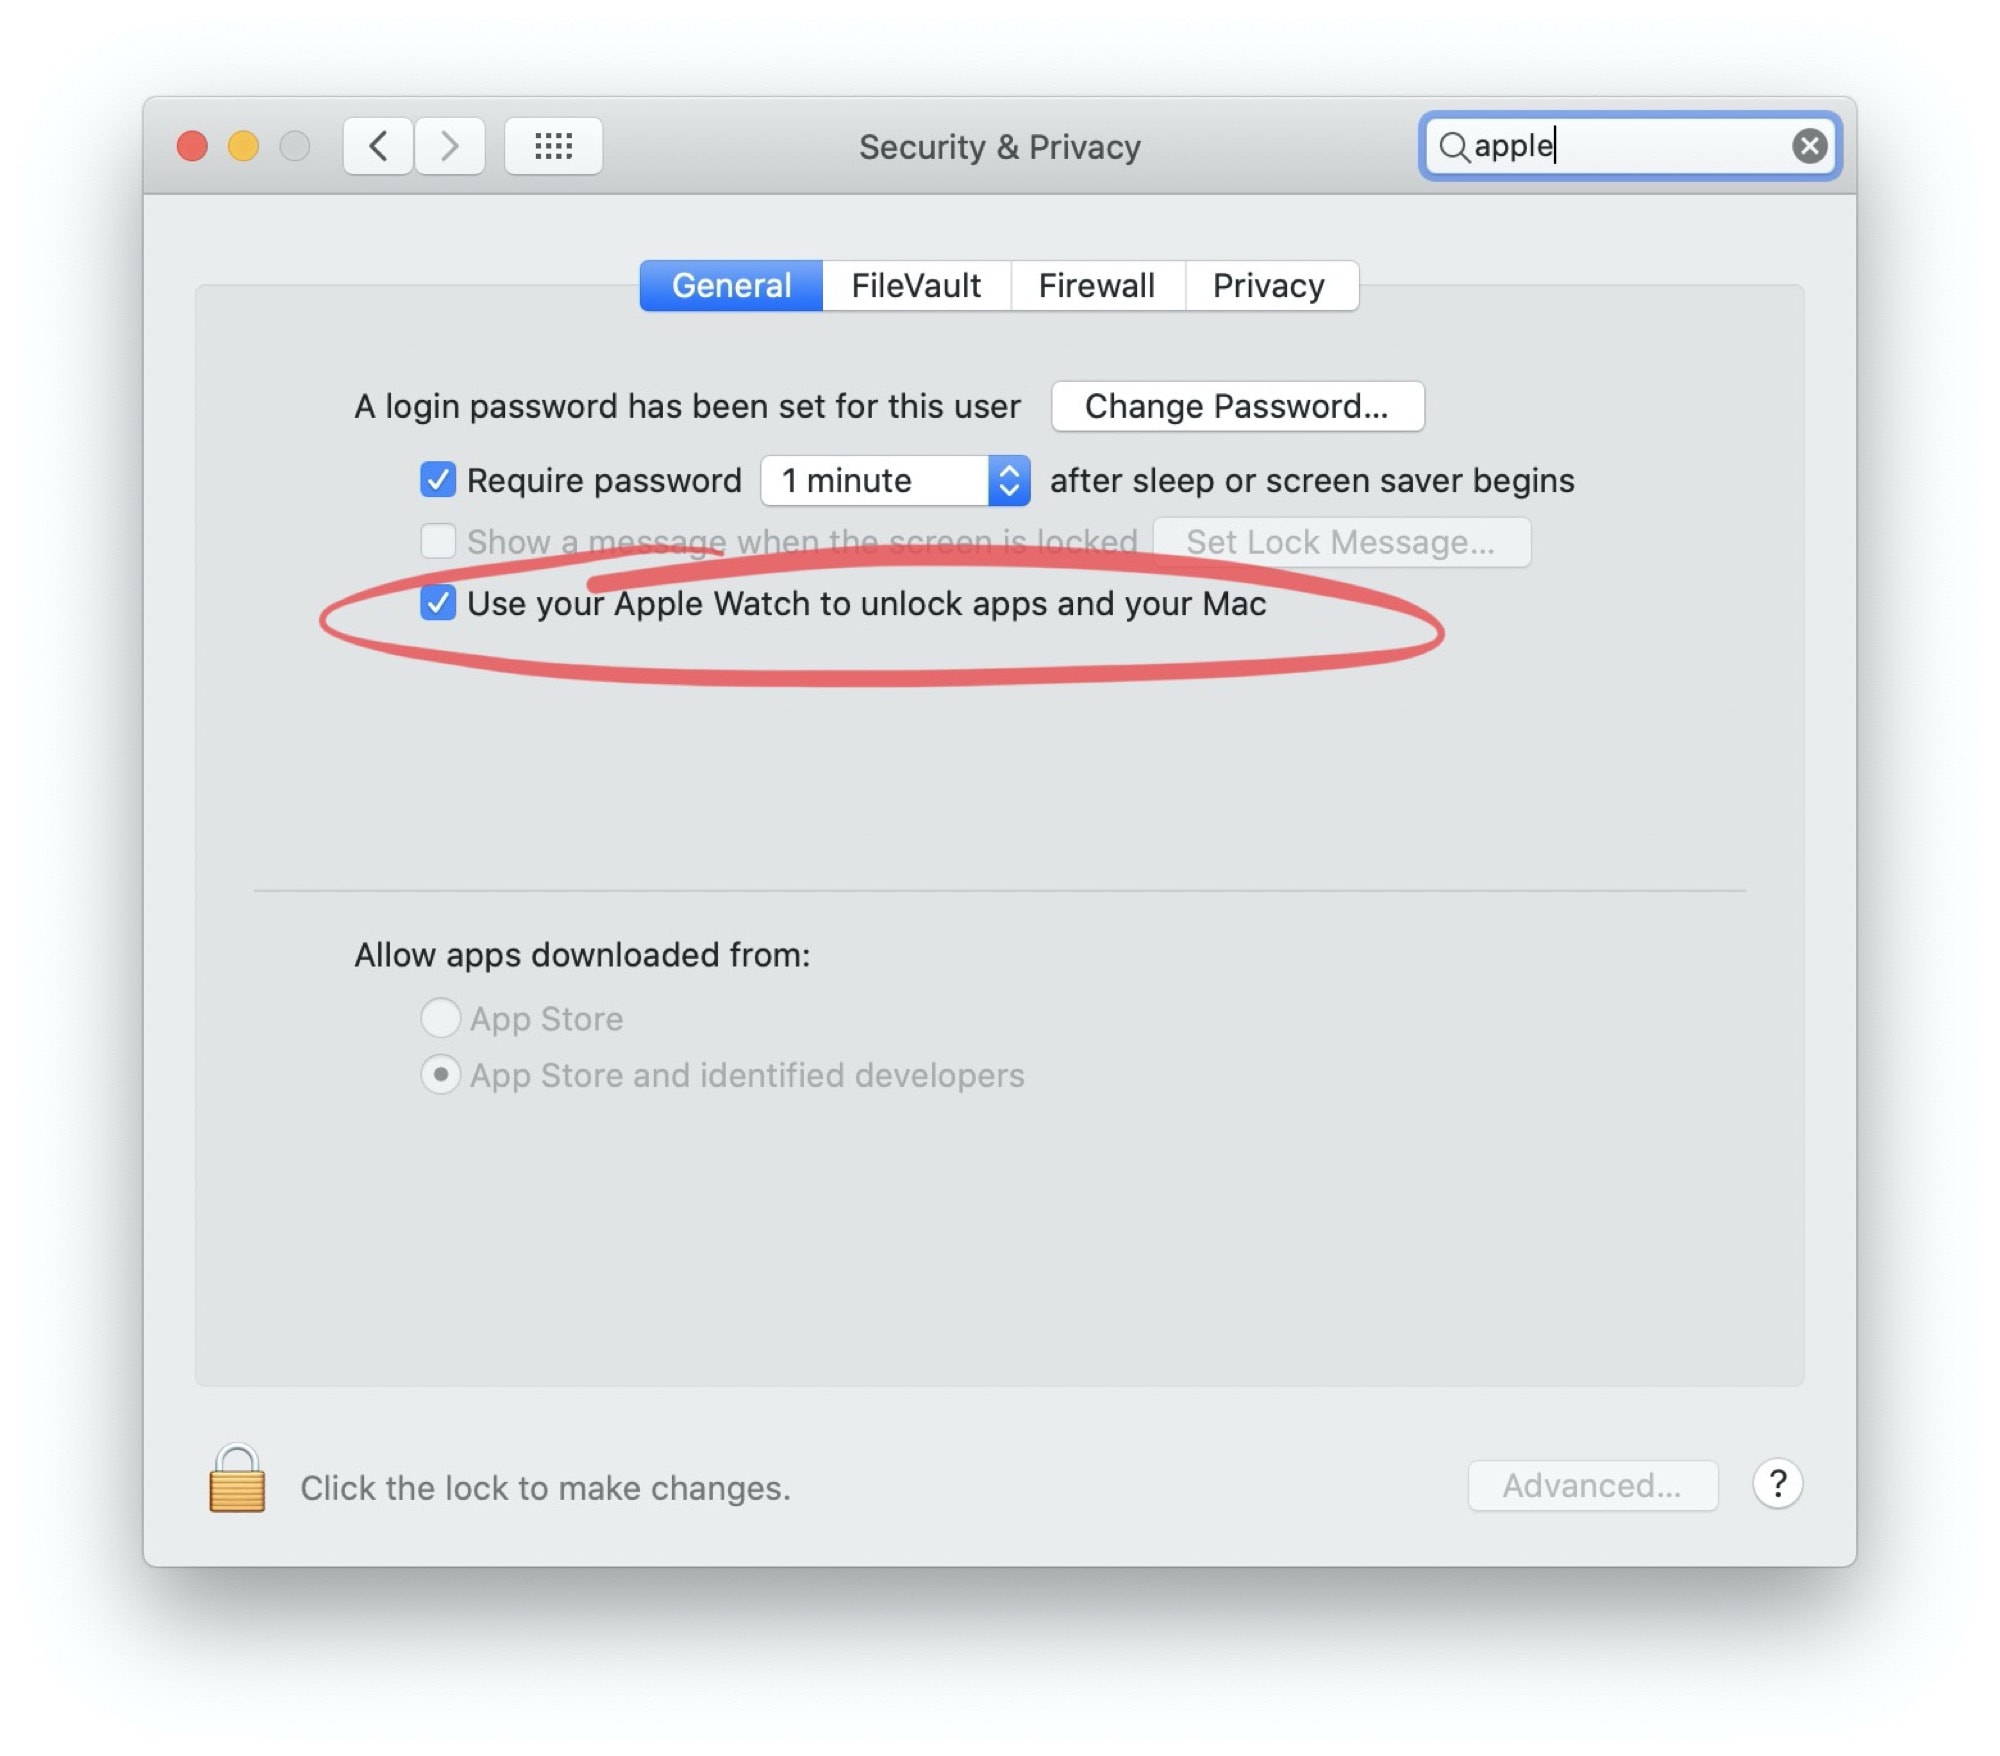 Just check this box if you want to unlock Mac with Apple Watch.